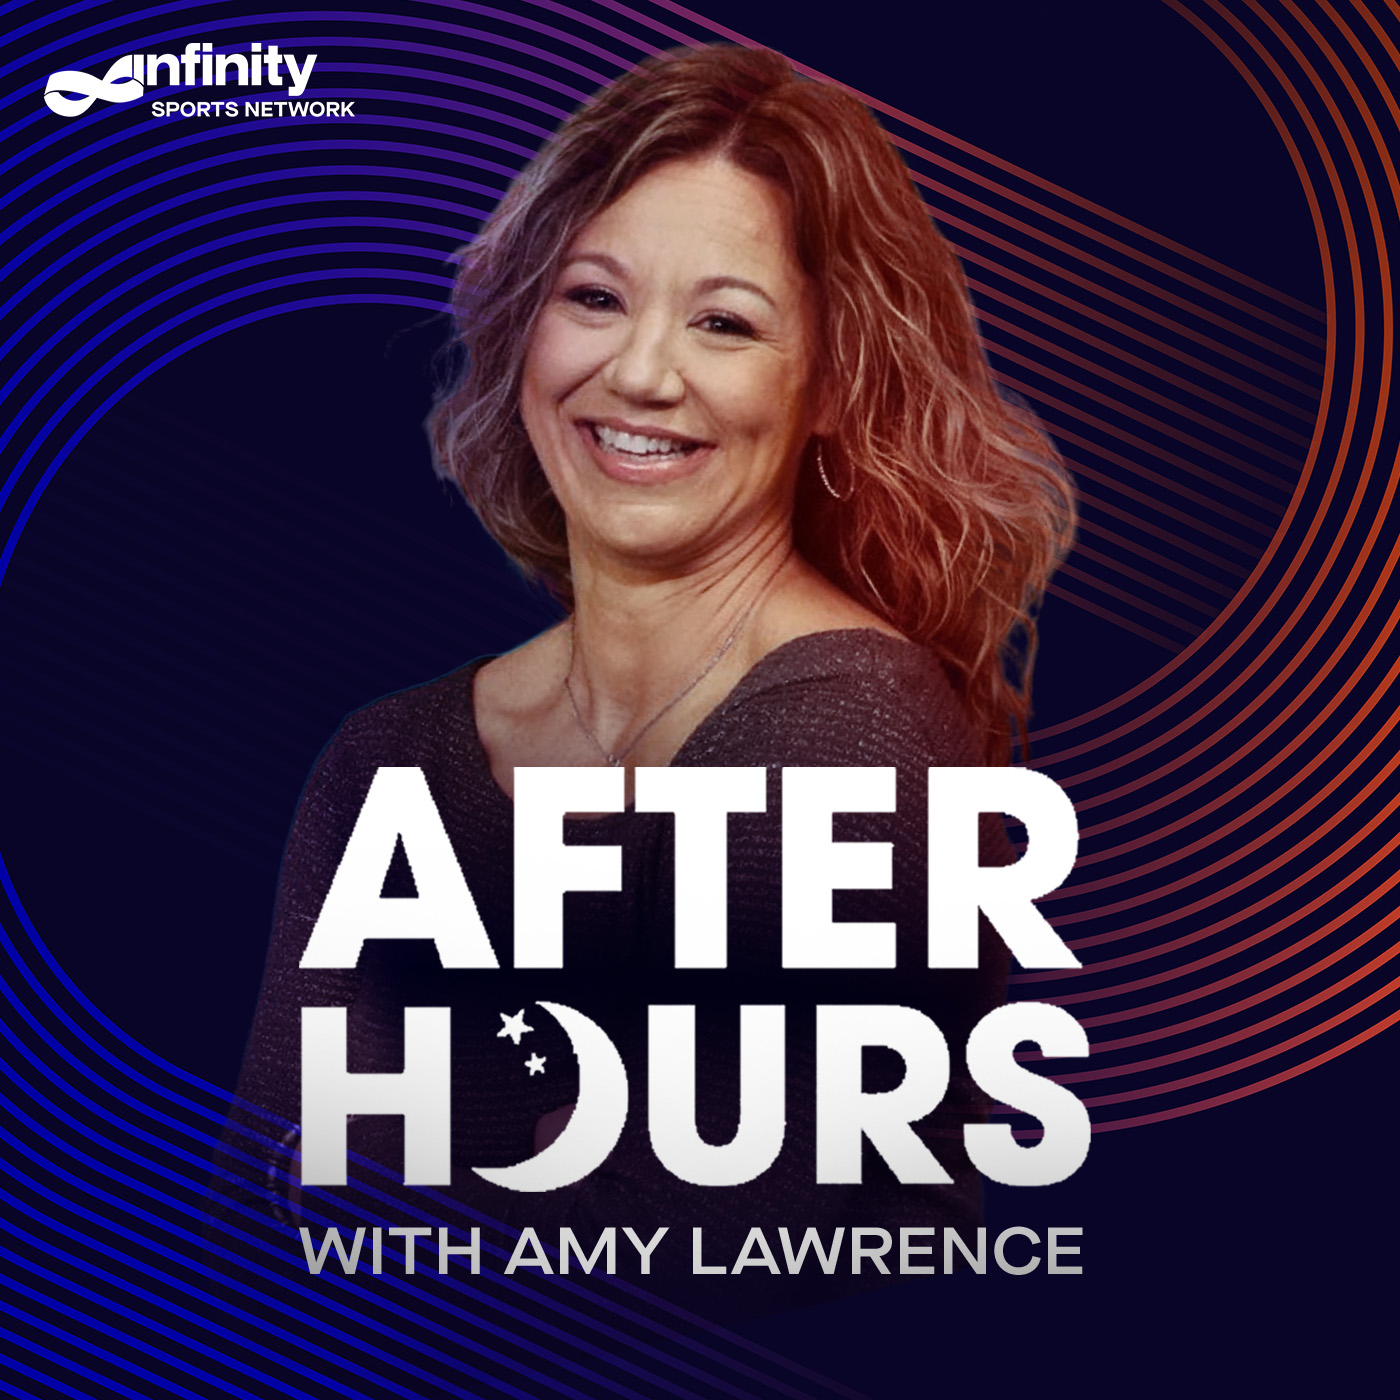 2-23-22 After Hours PODCAST: Hour 3